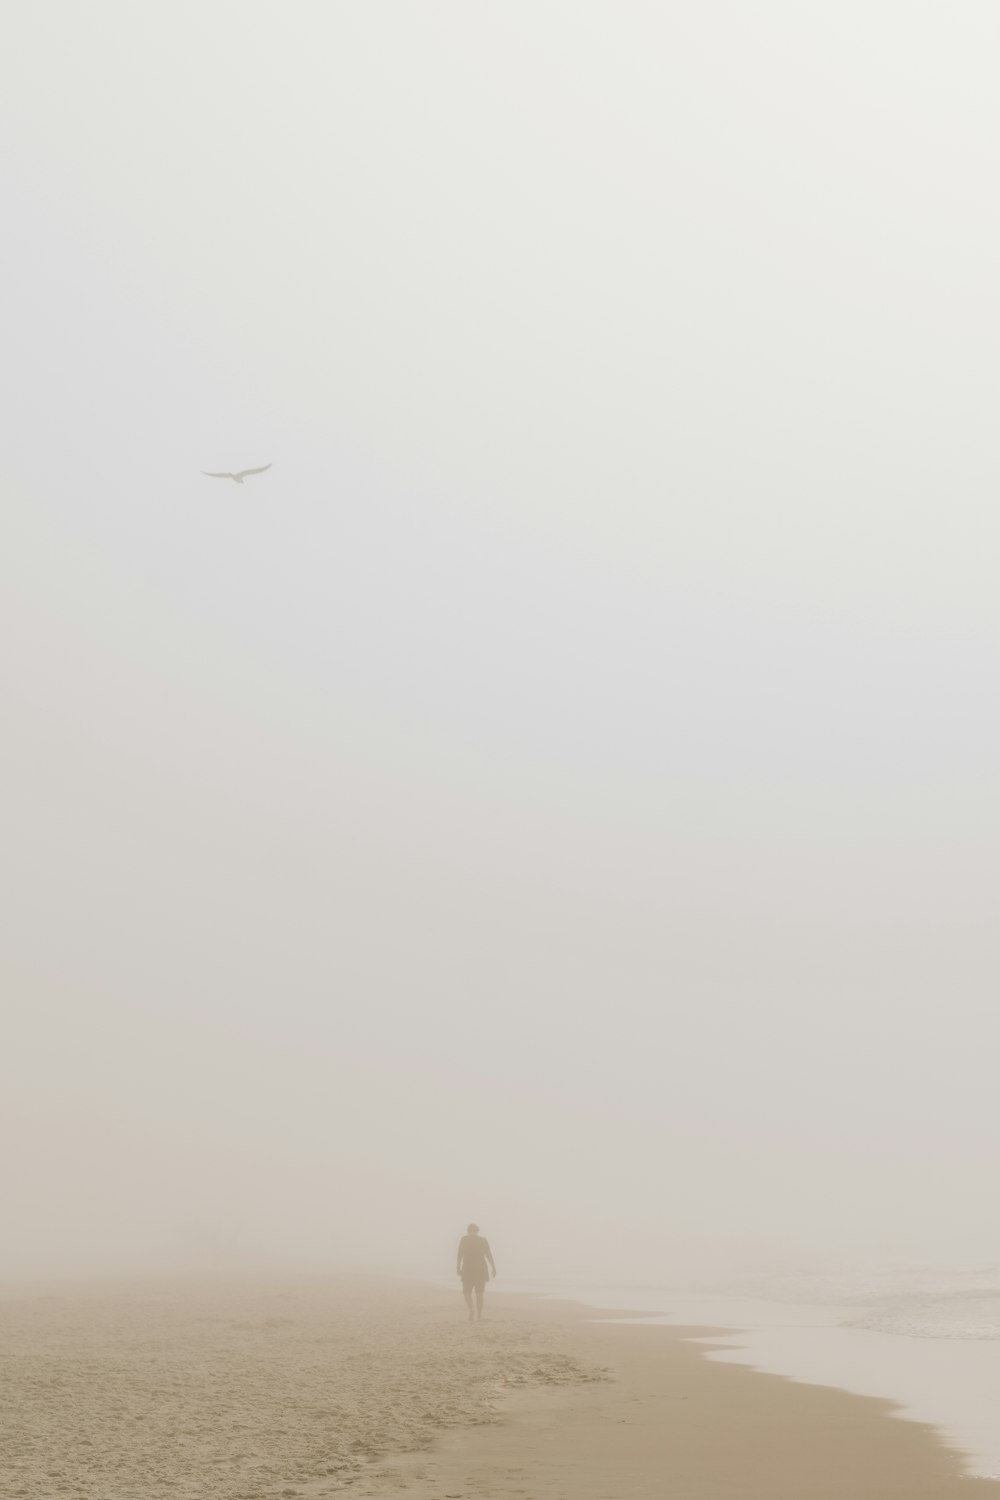 a person walking on a foggy beach with an airplane in the distance